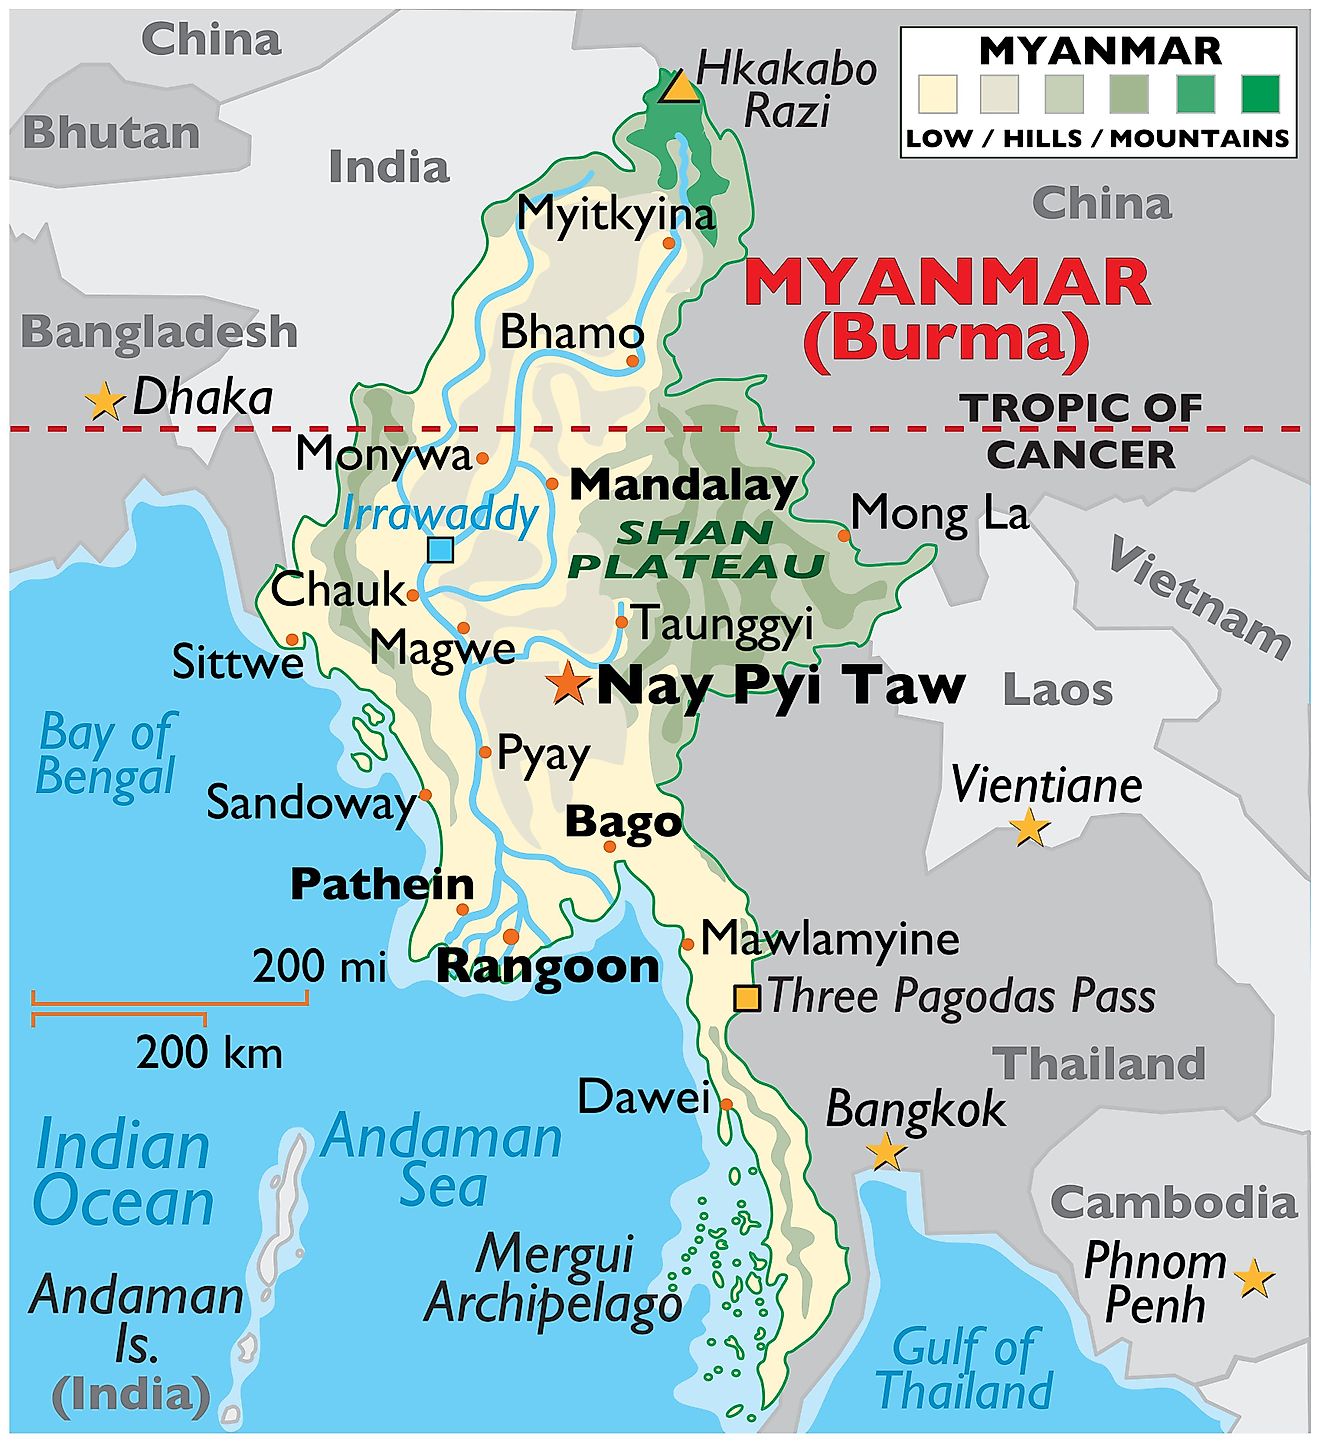 Physical Map of Myanmar showing state boundaries, relief, major rivers, highest point, important cities, Shan Plateau, and more